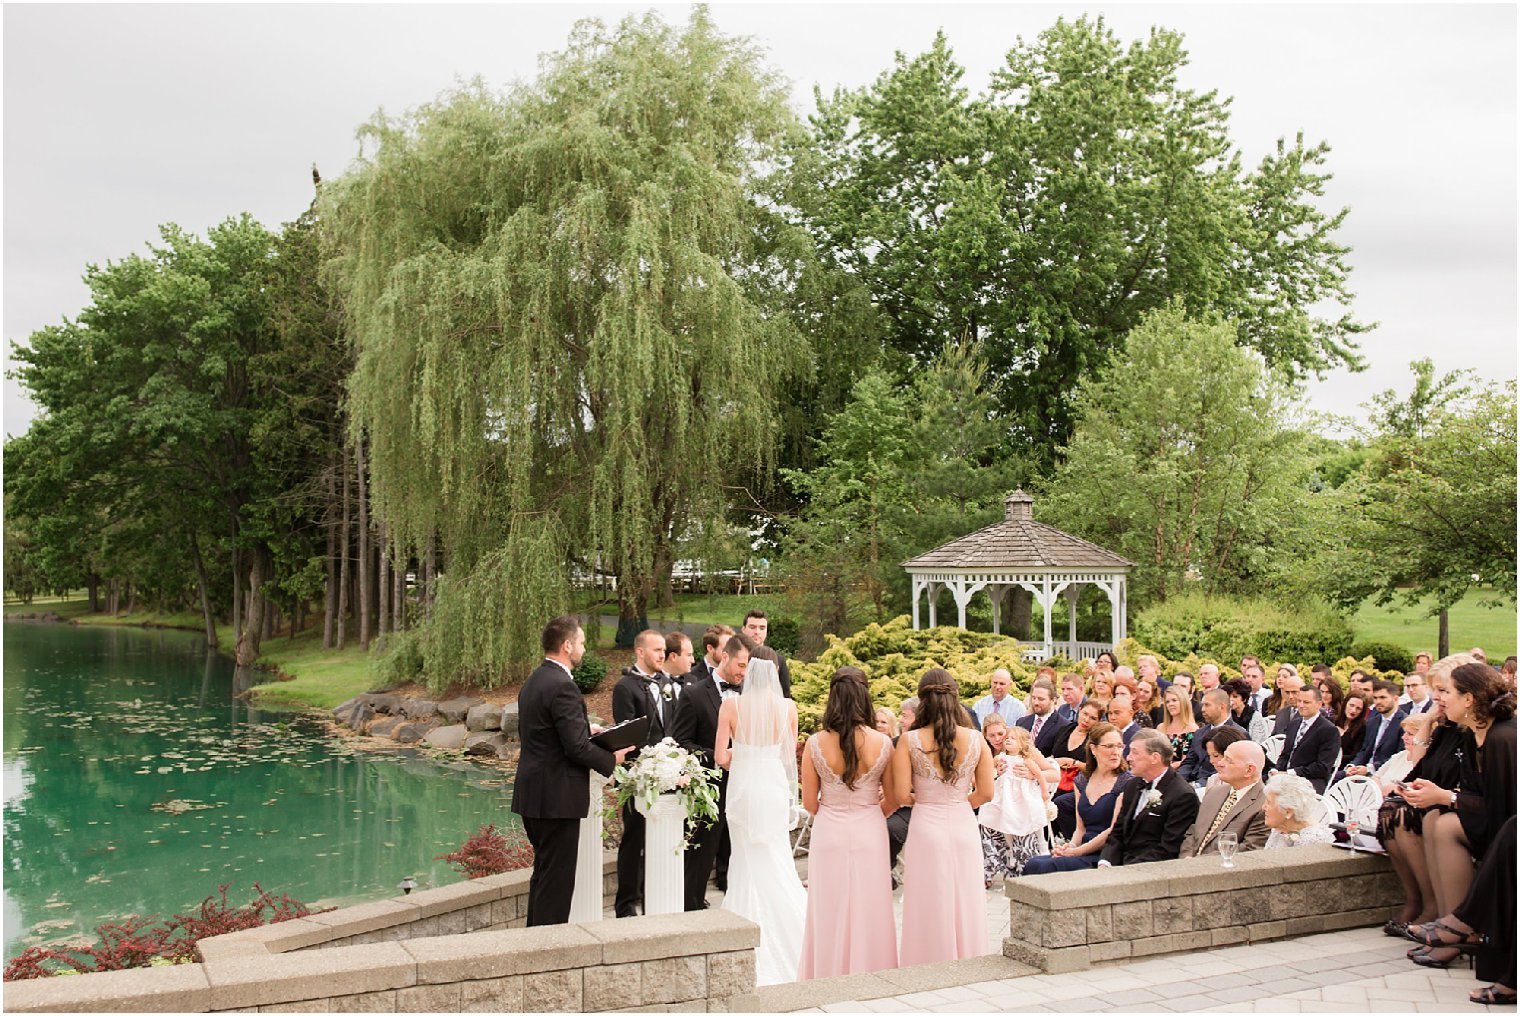 Lakeside ceremony at Windows on the Water at Frogbridge